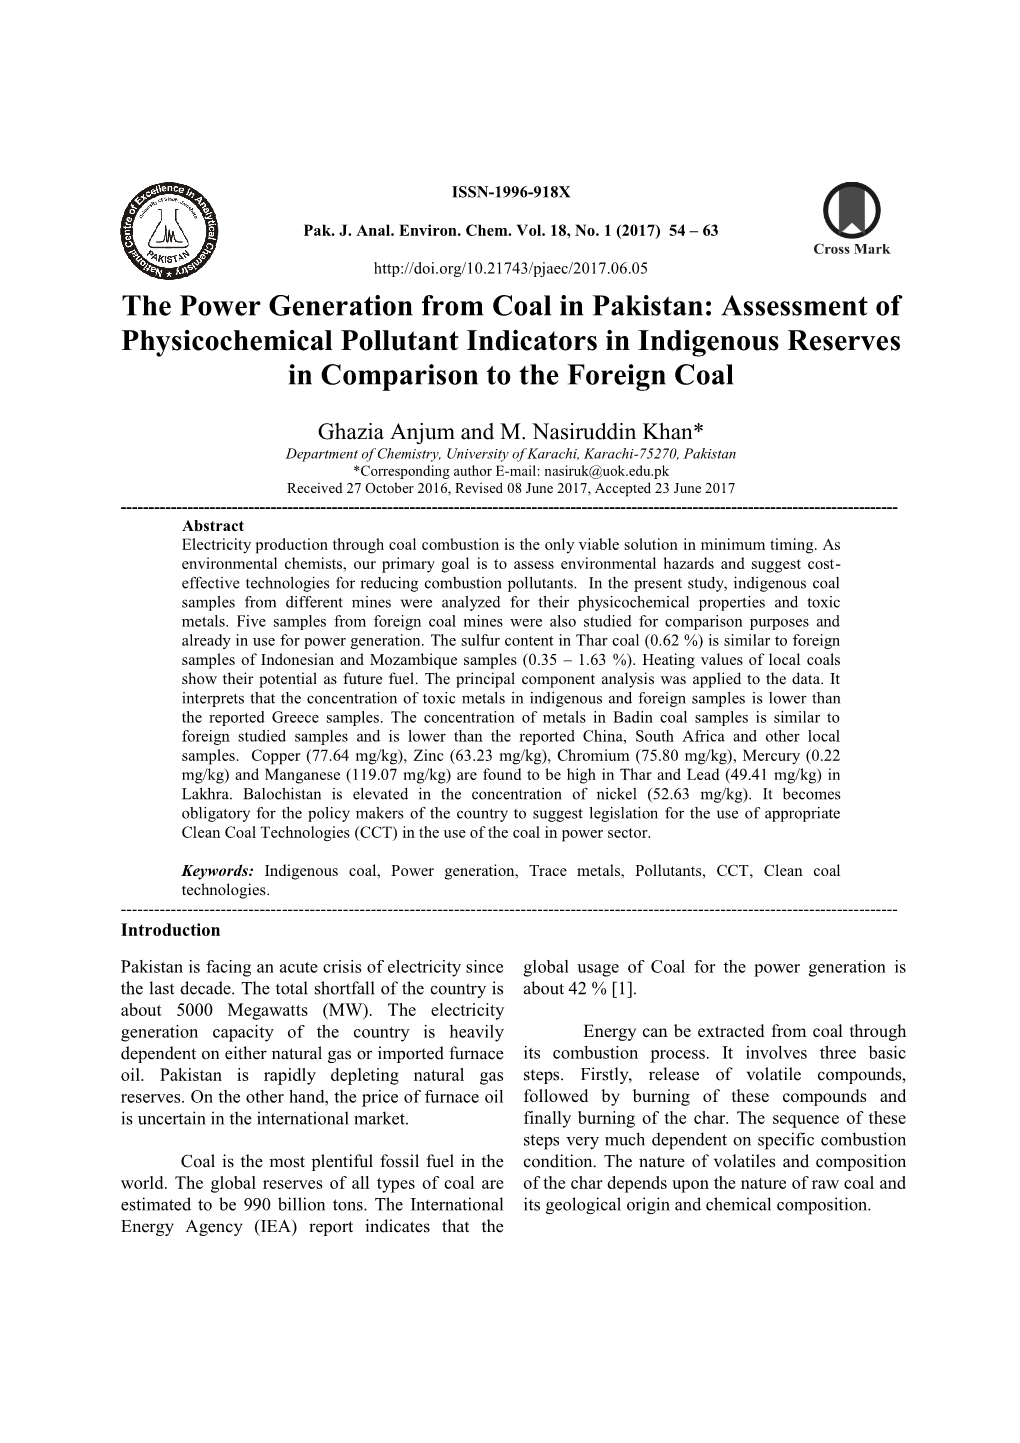 The Power Generation from Coal in Pakistan: Assessment of Physicochemical Pollutant Indicators in Indigenous Reserves in Comparison to the Foreign Coal